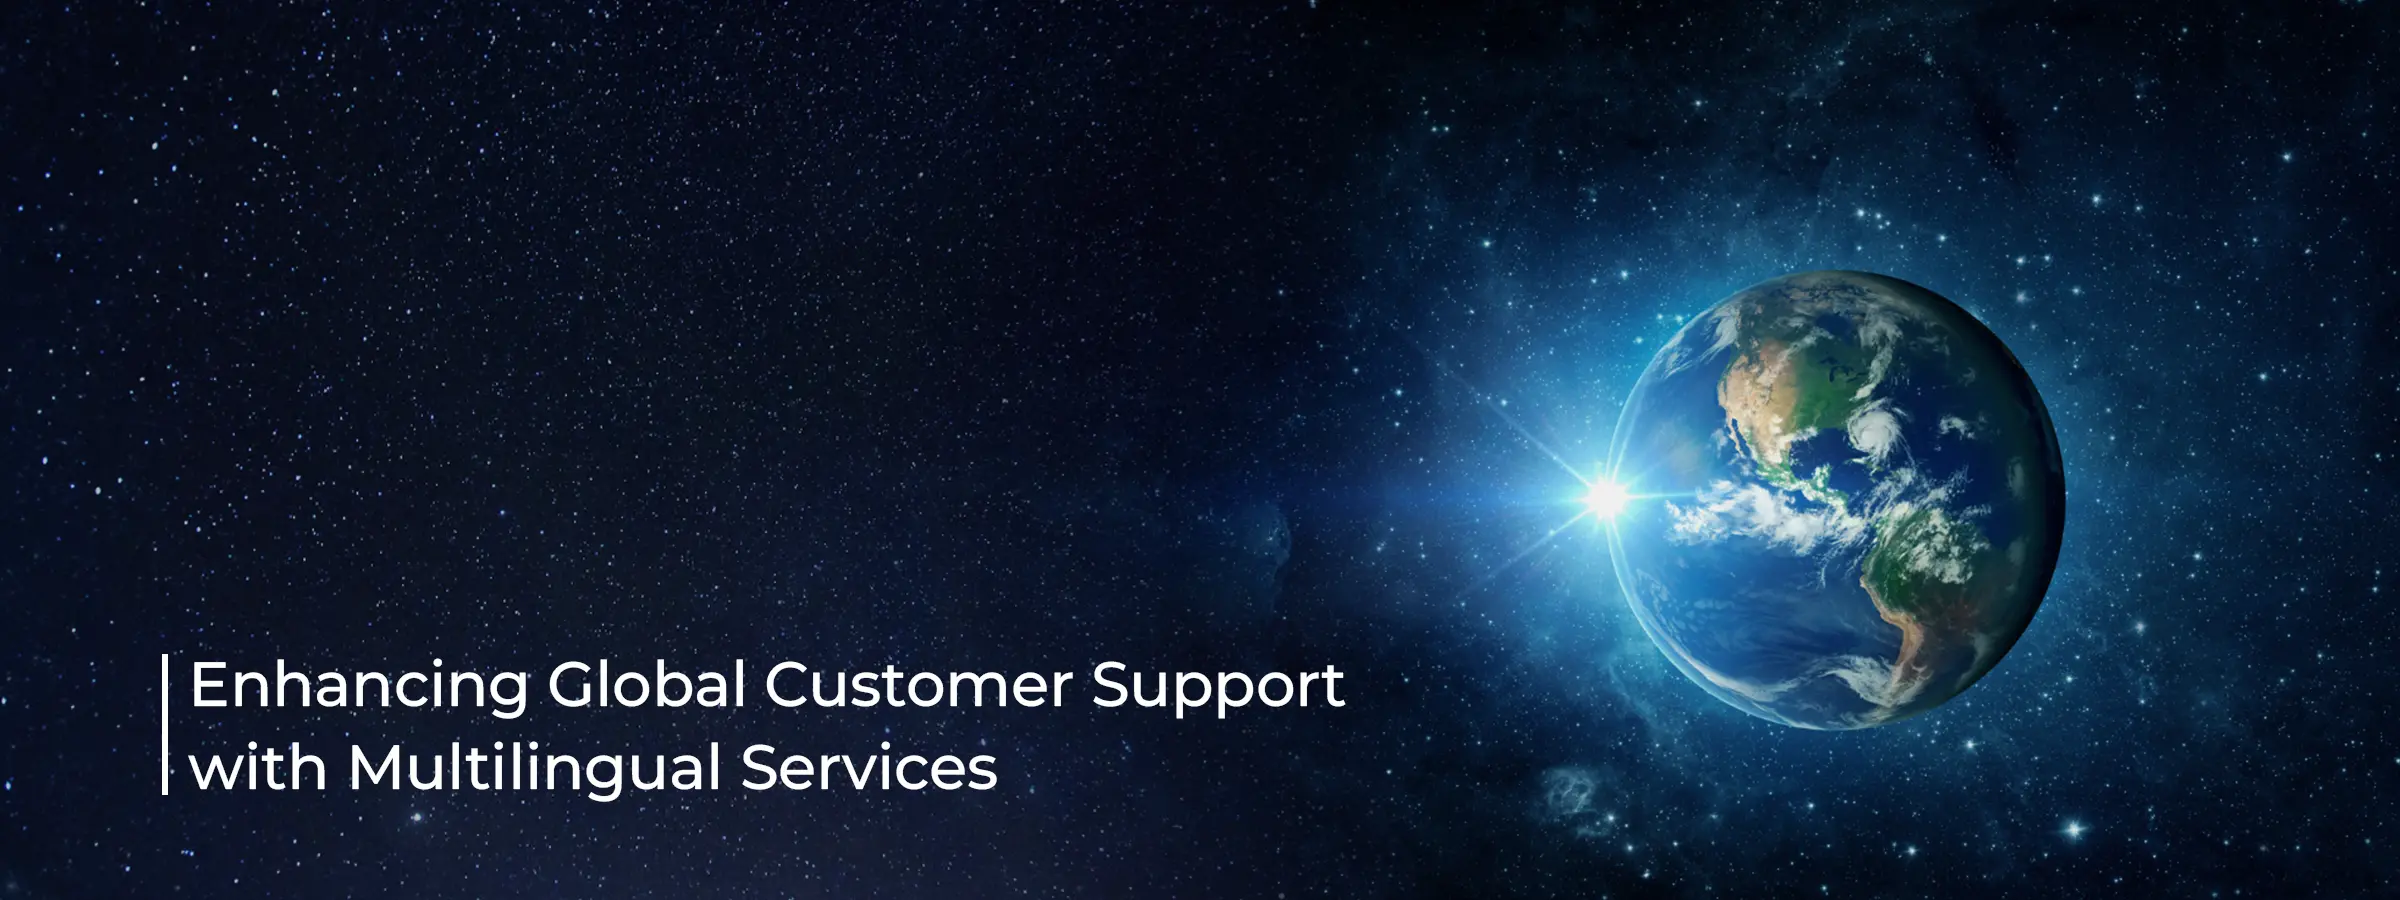 enhancing-global-customer-support-with-multilingual-services